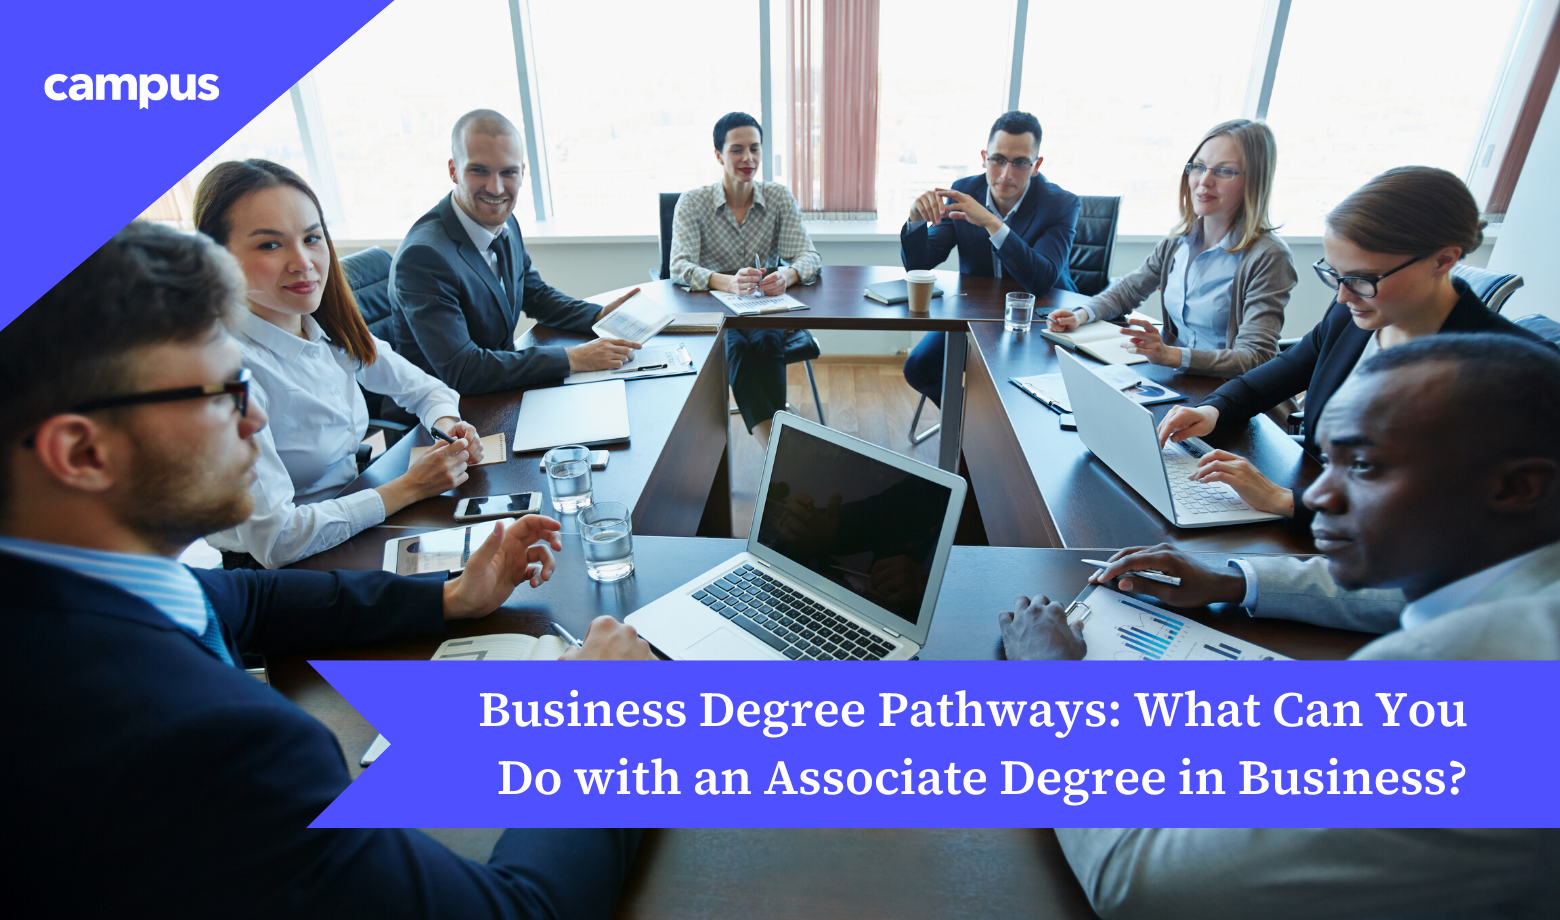 Business Degree Pathways: What Can You Do with an Associate Degree in Business?